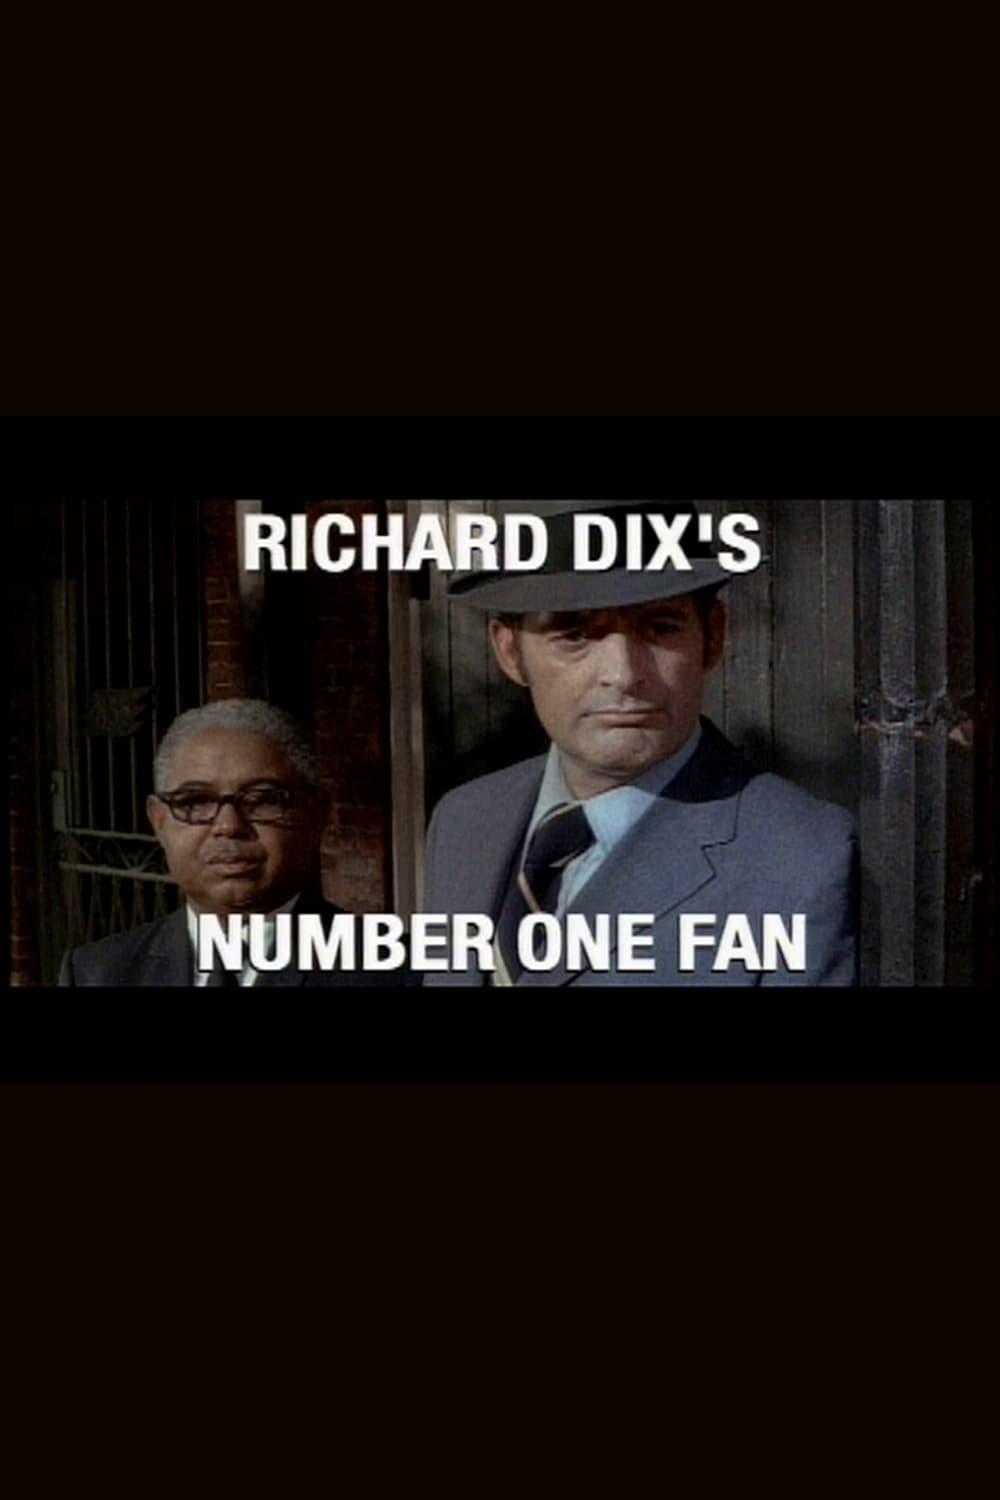 Richard Dix's Number One Fan poster